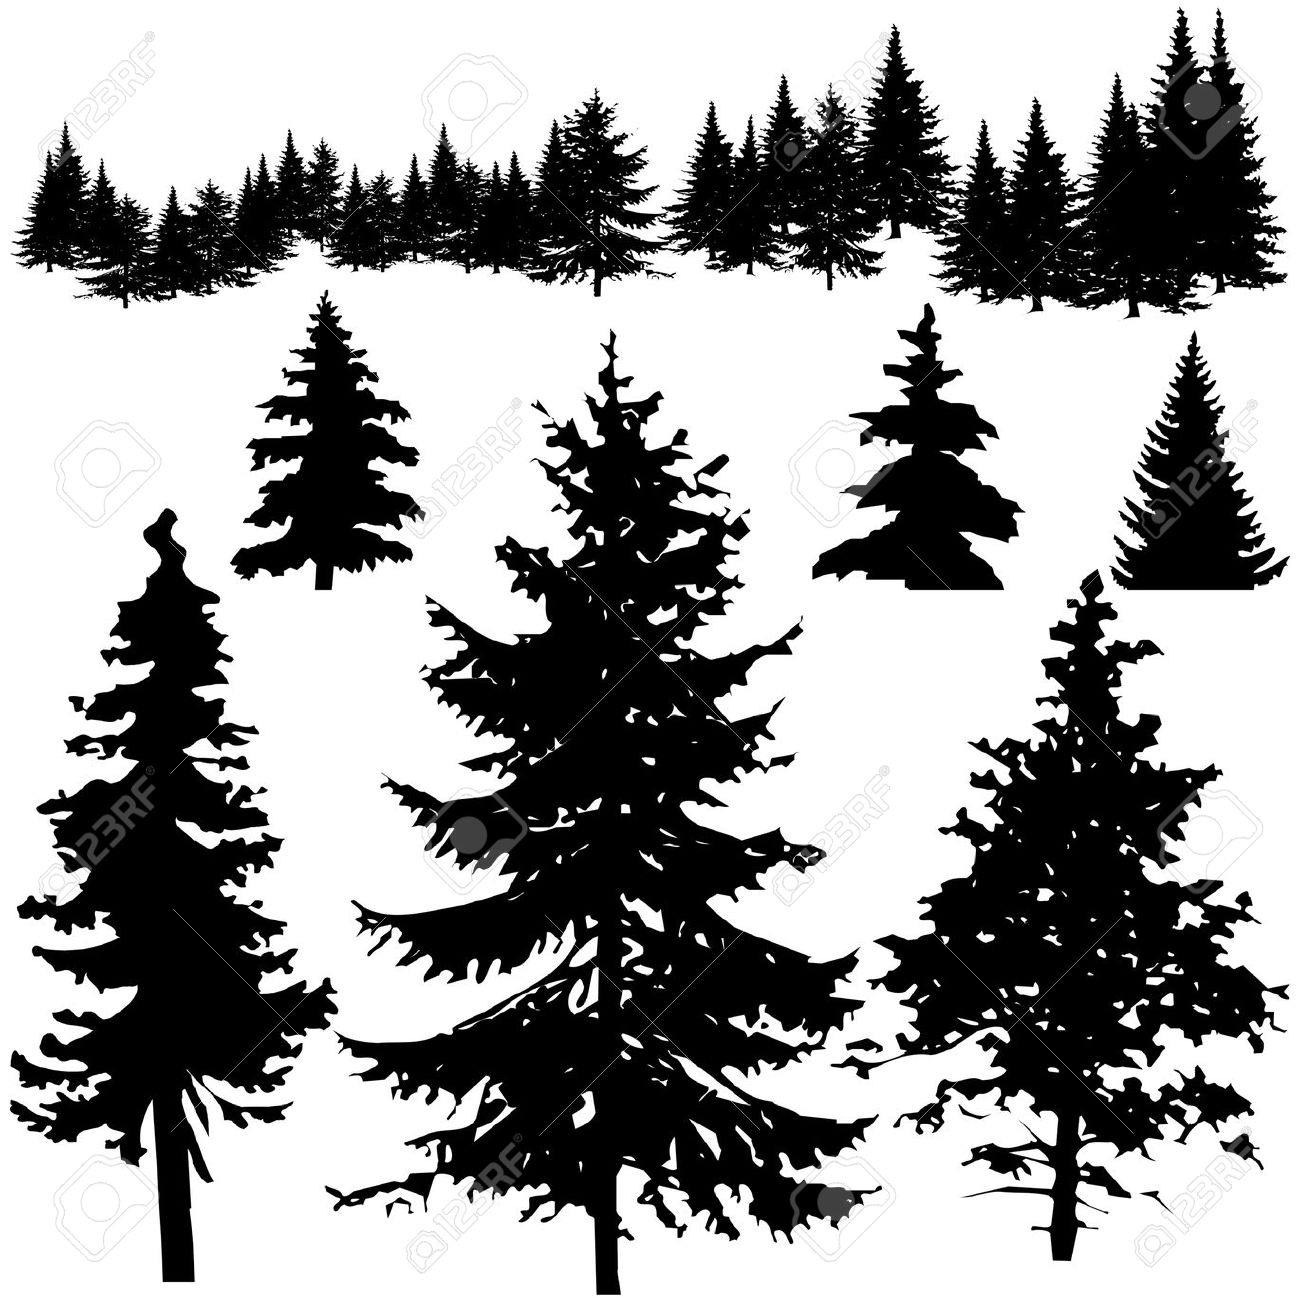 Pine tree silhouette clipart 2.